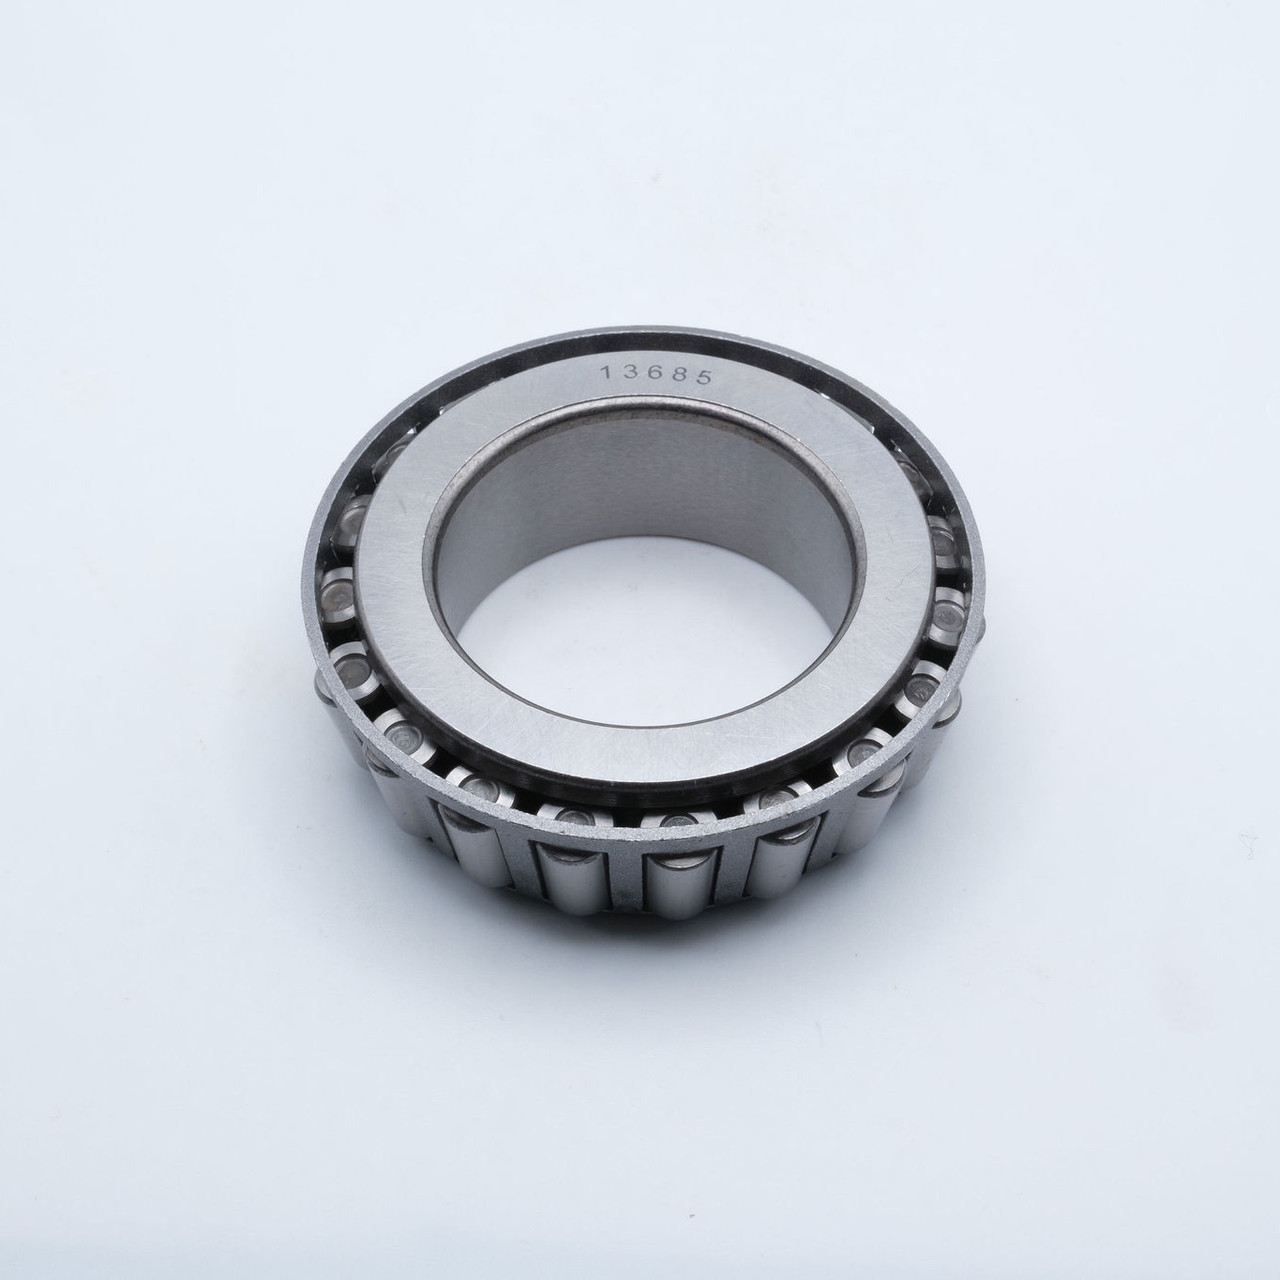 31594 Tapered Roller Bearing Cone 1-3/8" Bore Bottom View